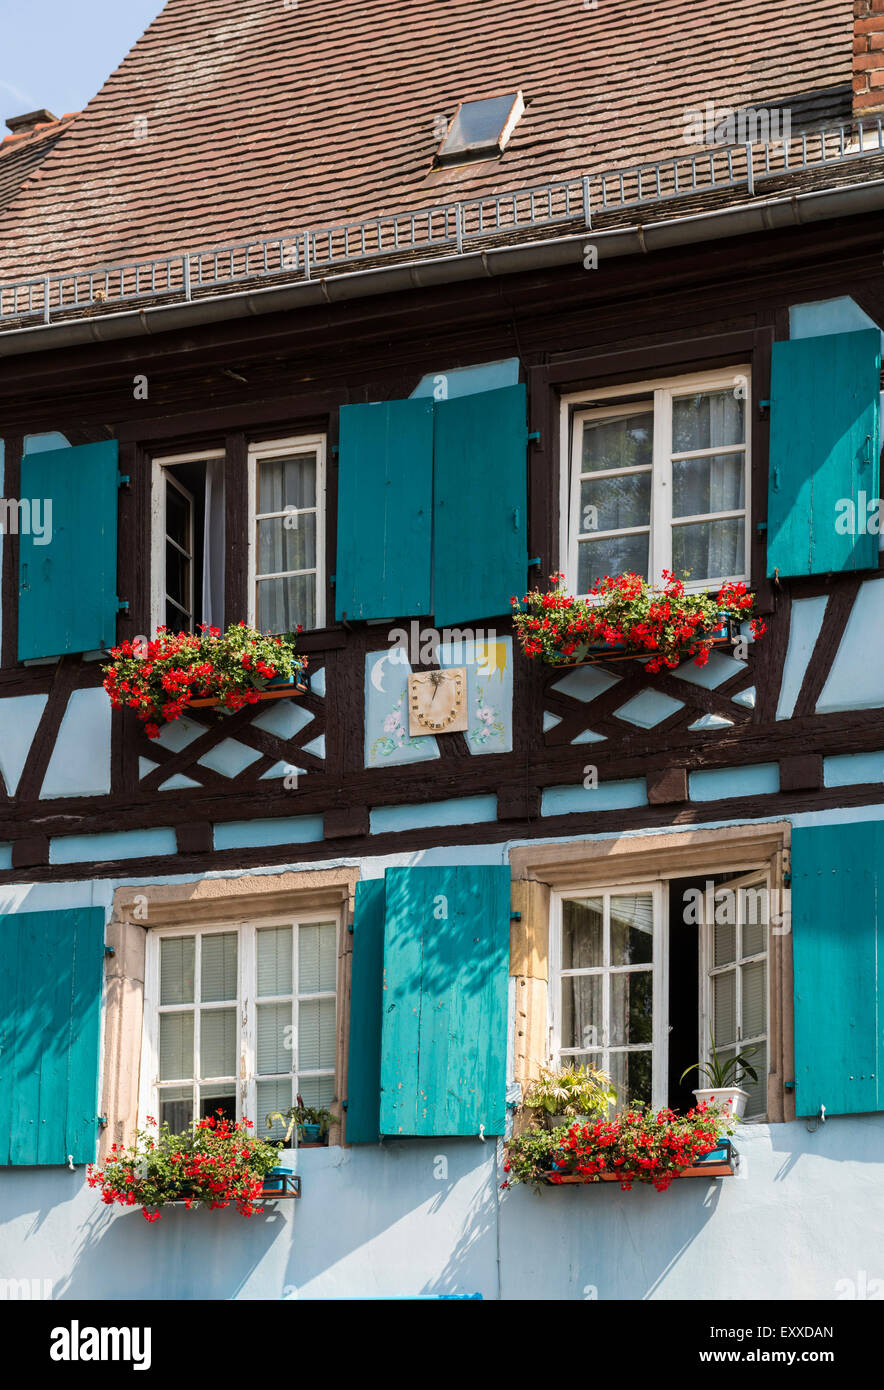 Typical half-timbered house in La Petite Venise or Little Venice district in old town of Colmar, Alsace, France, Europe Stock Photo